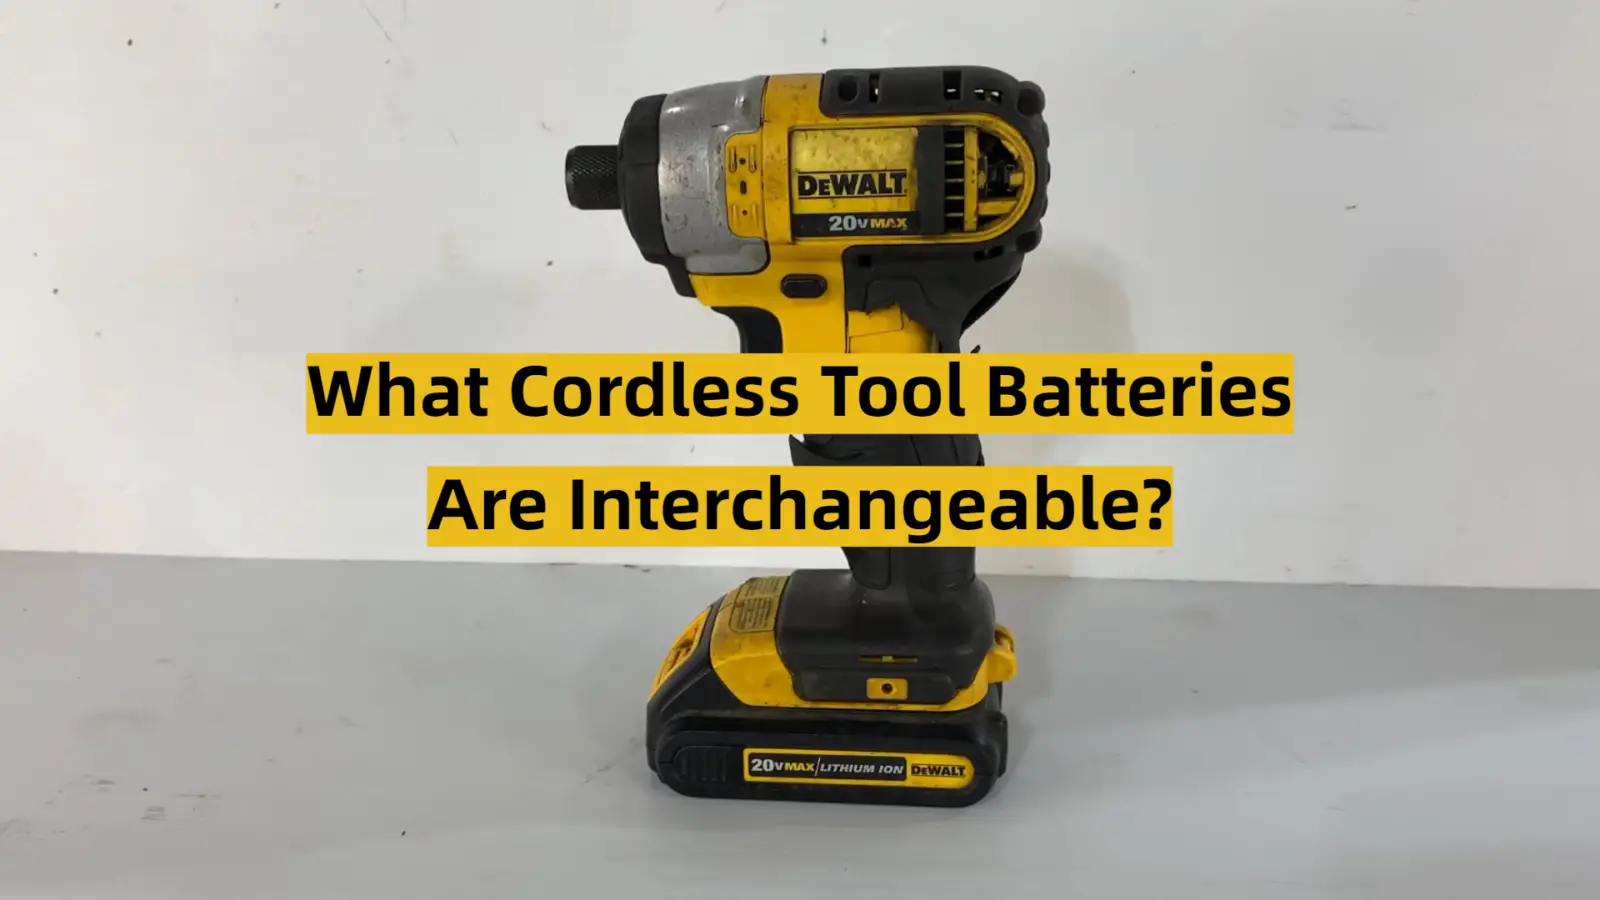 What Cordless Tool Batteries Are Interchangeable?